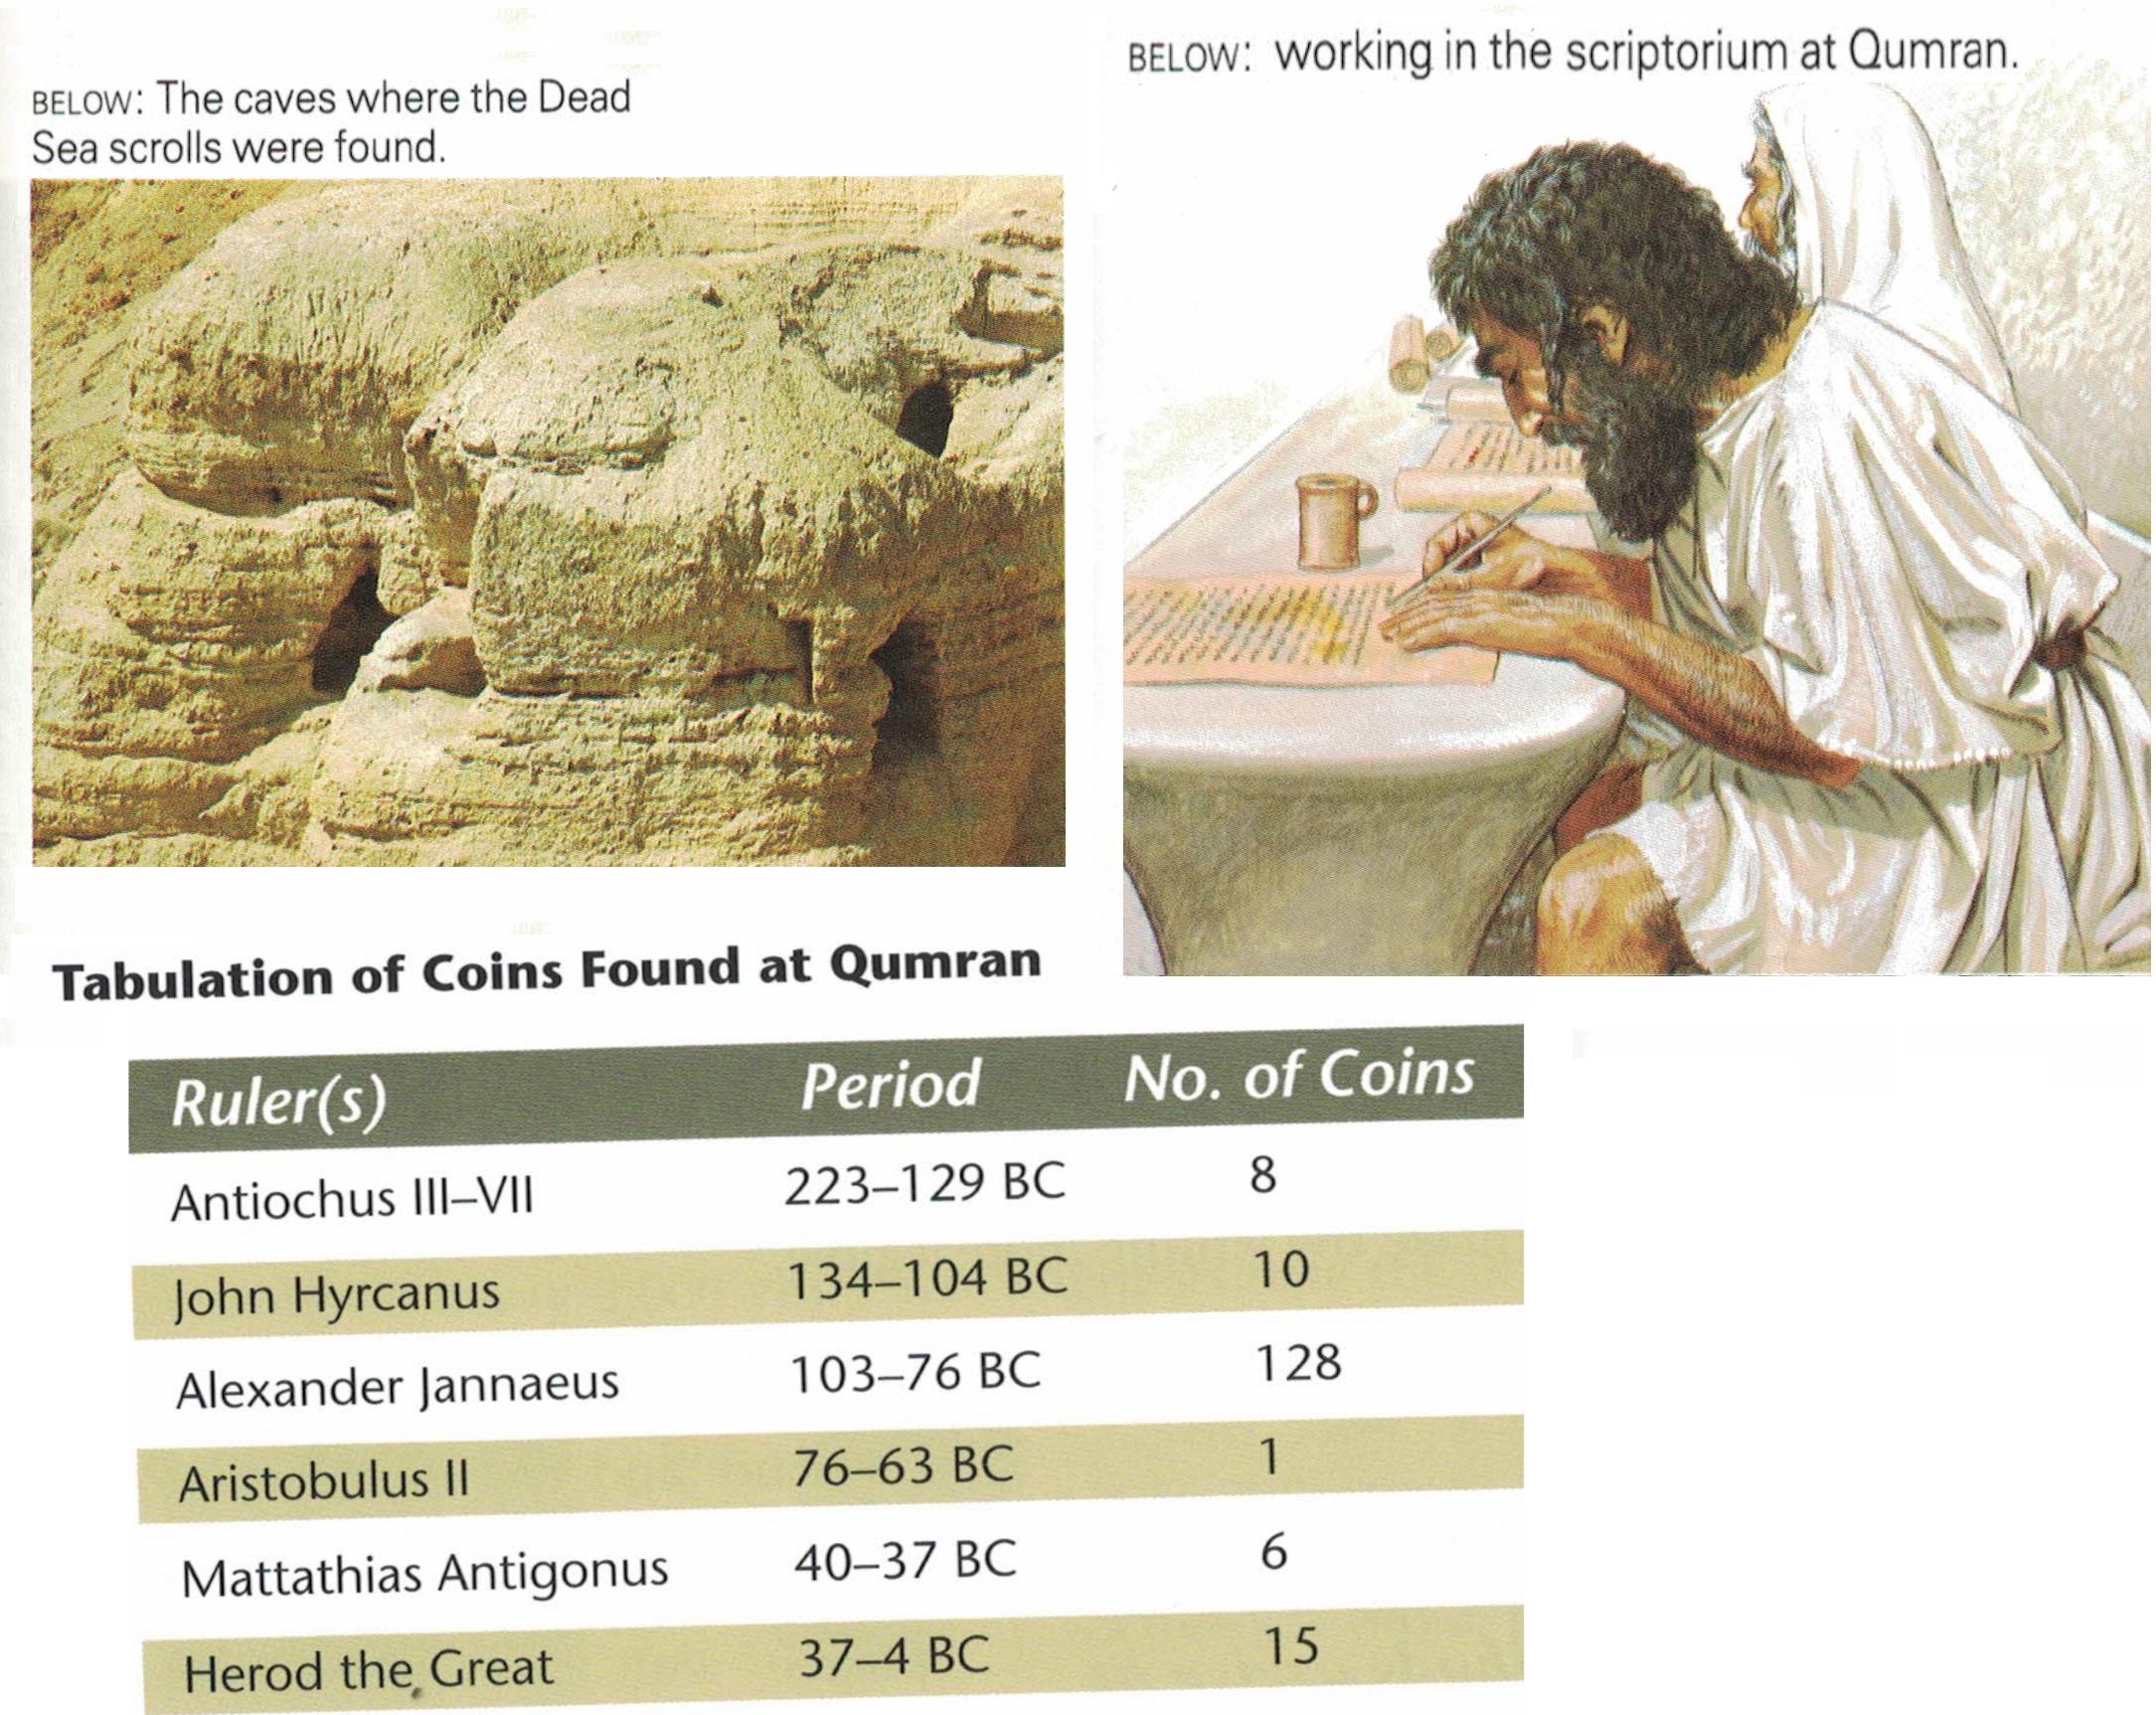 coins listed found in caves with DSS picture of caves and artwork of scribe writing on scrolls